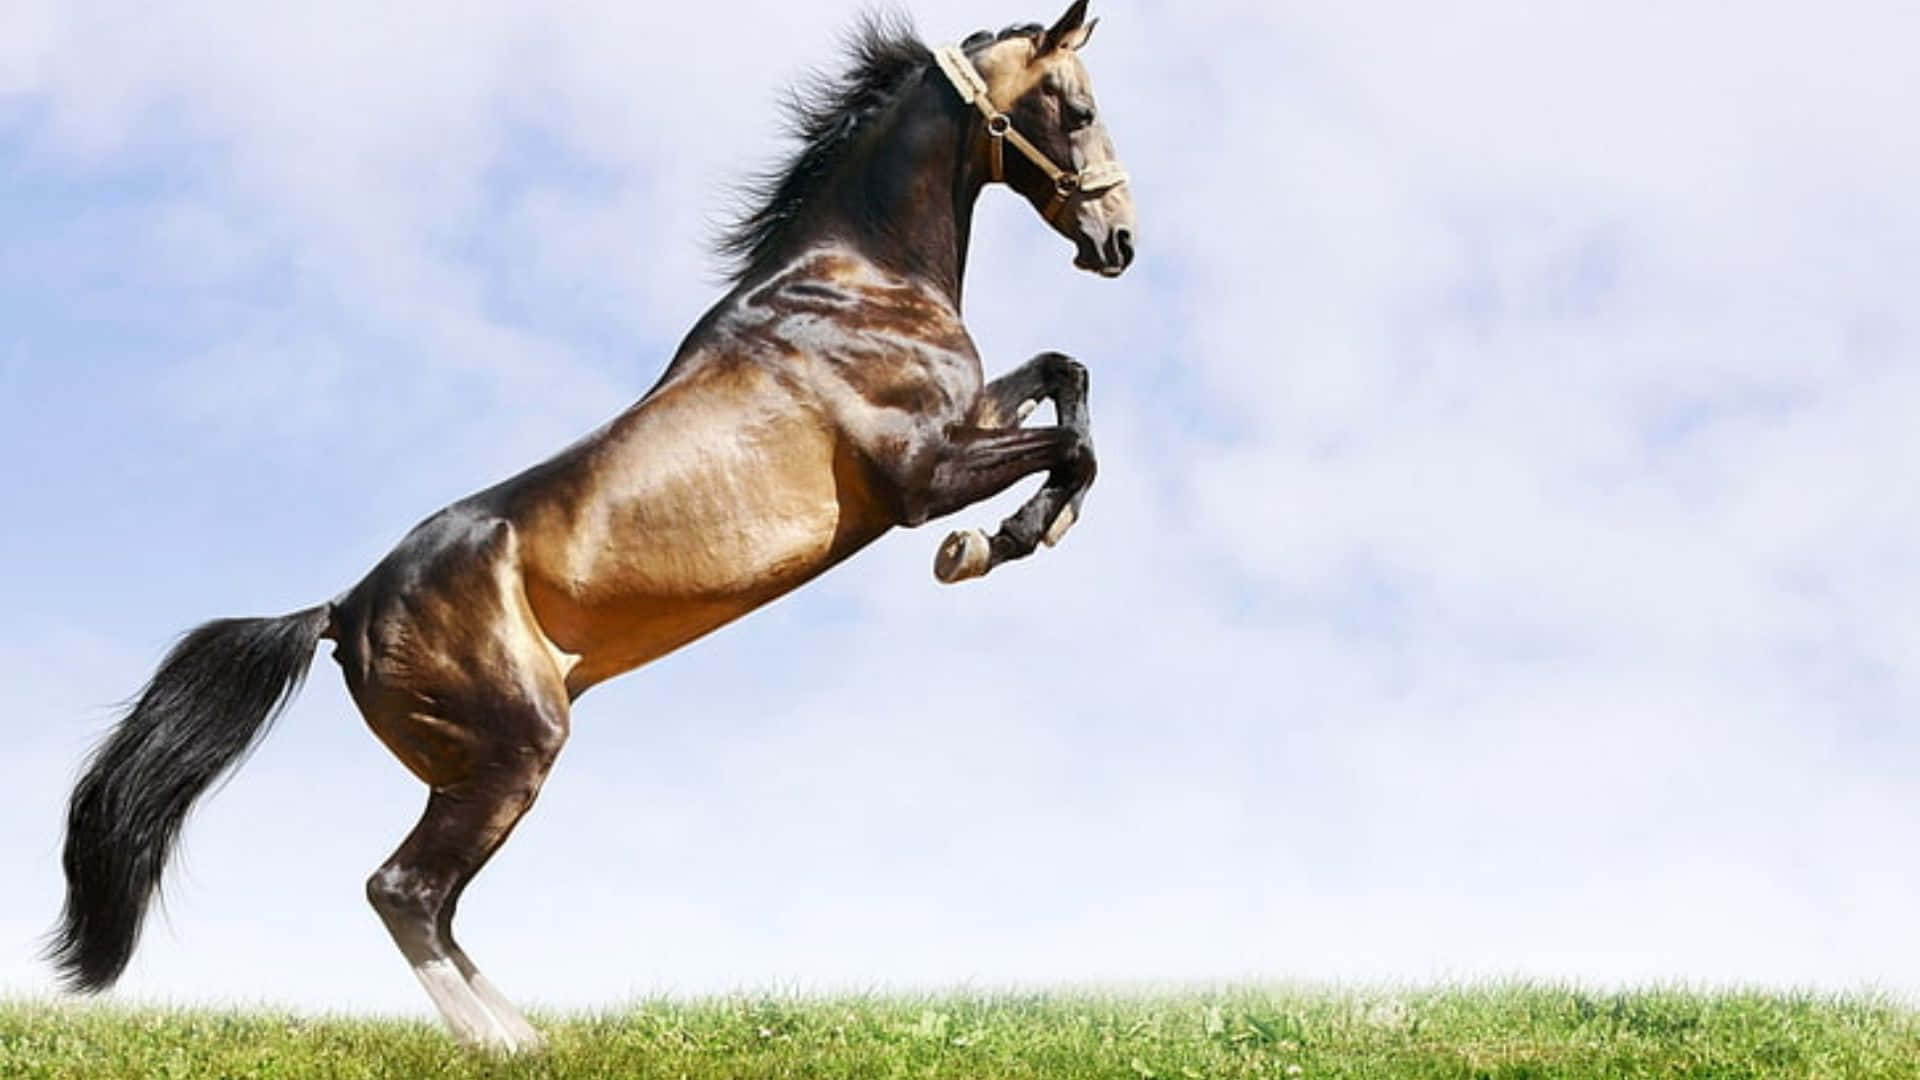 A Powerful Cool Horse Stands Tall With Its Mane Swept In The Wind. Background